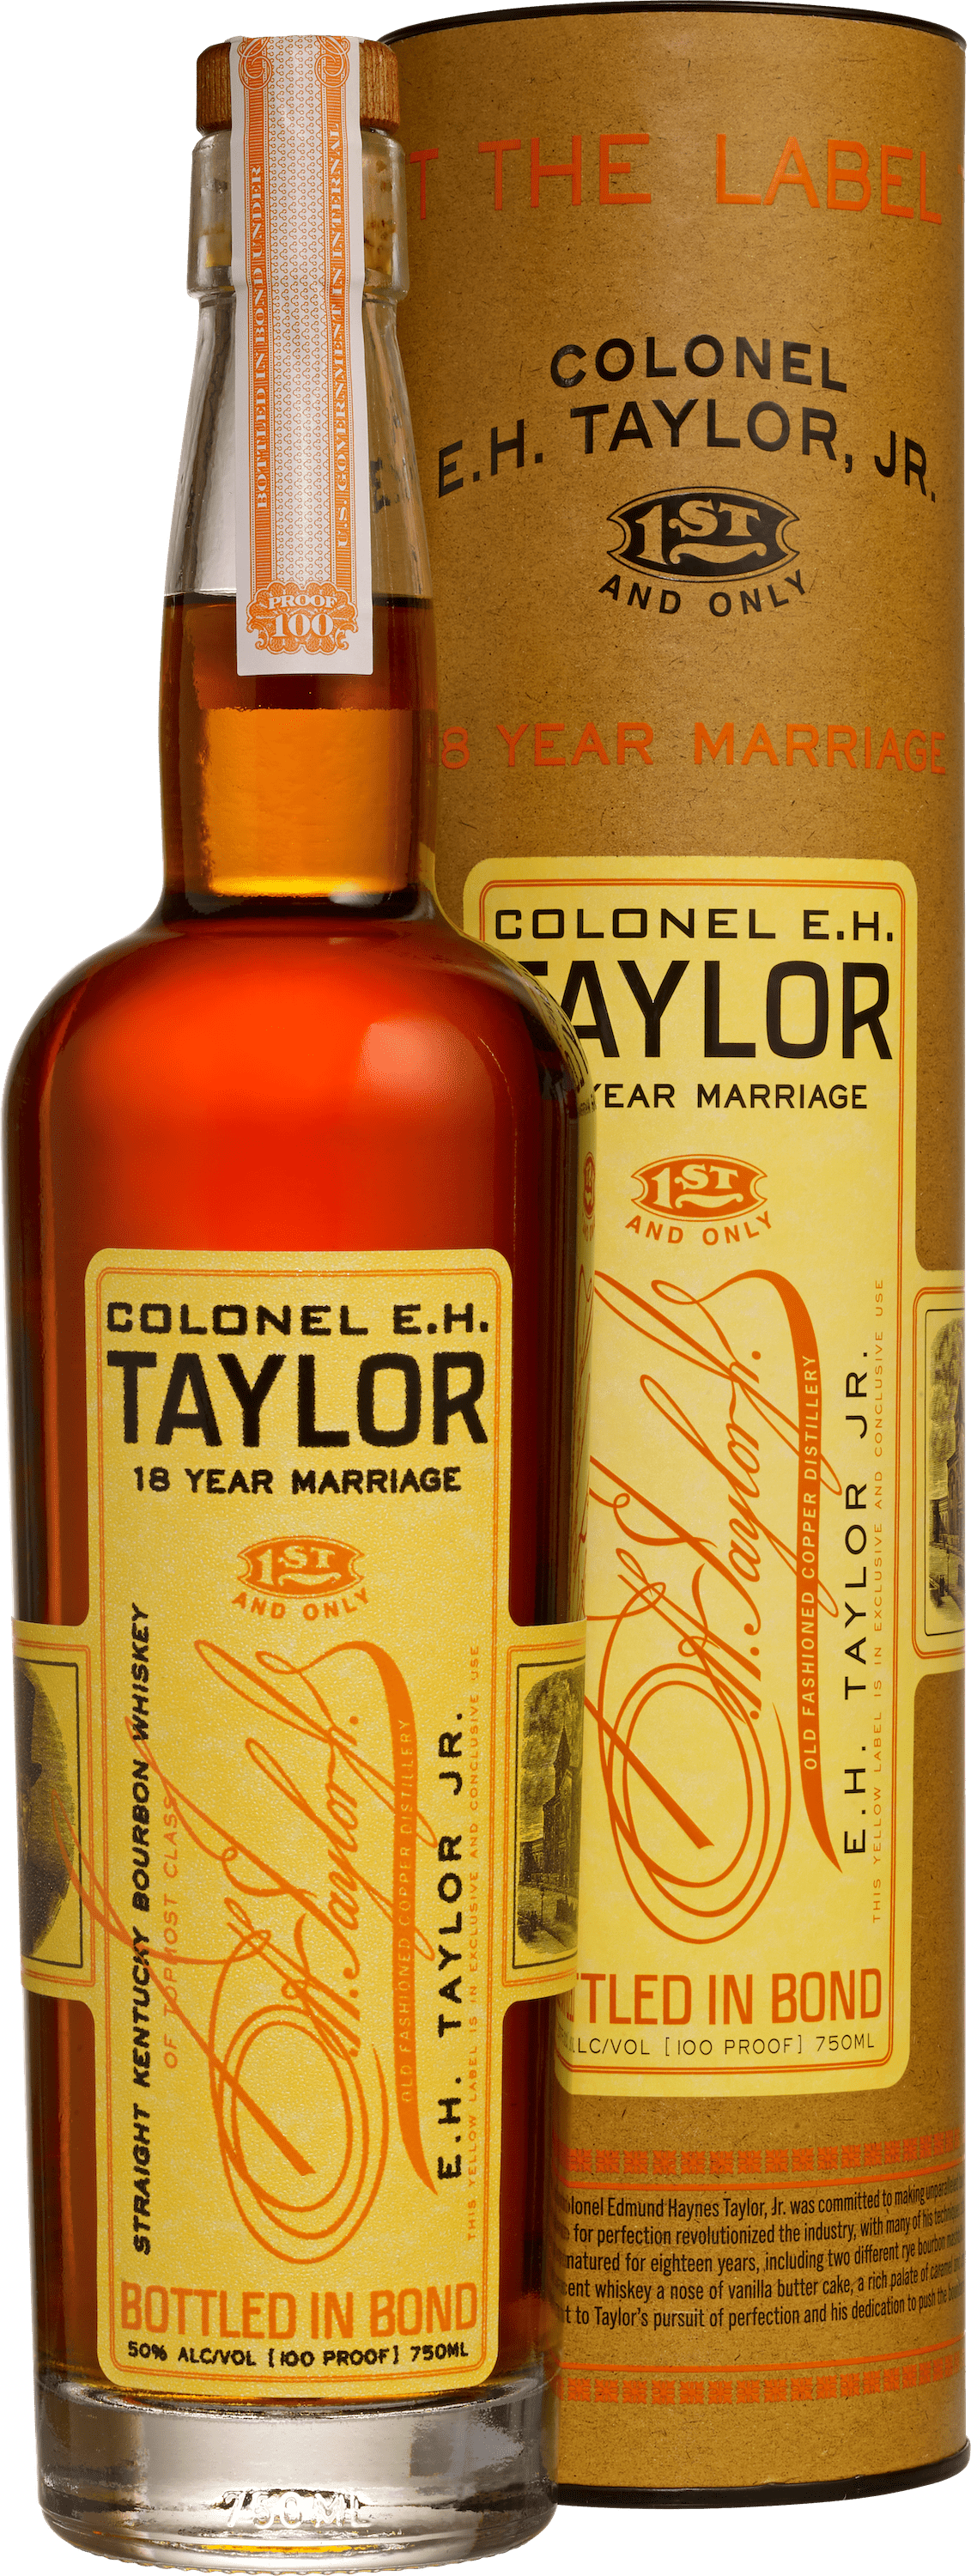 E.H. Taylor, Jr. 18 Year Marriage bottle with canister